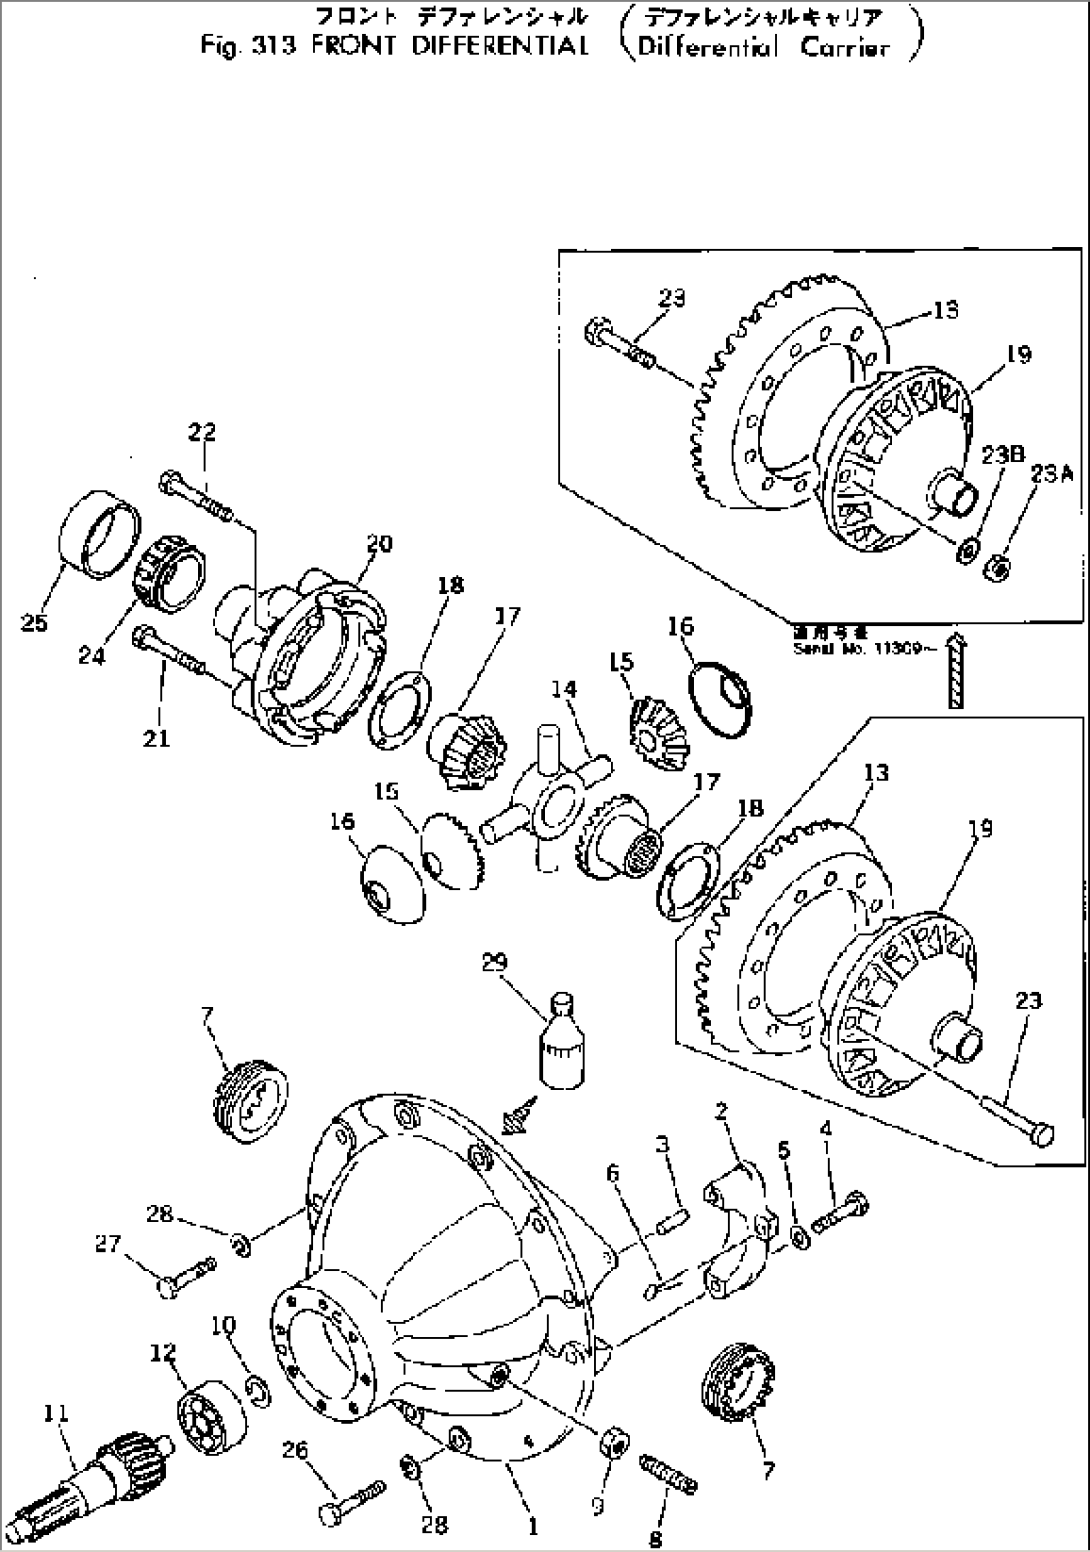 FRONT DIFFERENTIAL (DIFFERENTIAL CARRIER)(#10001-)